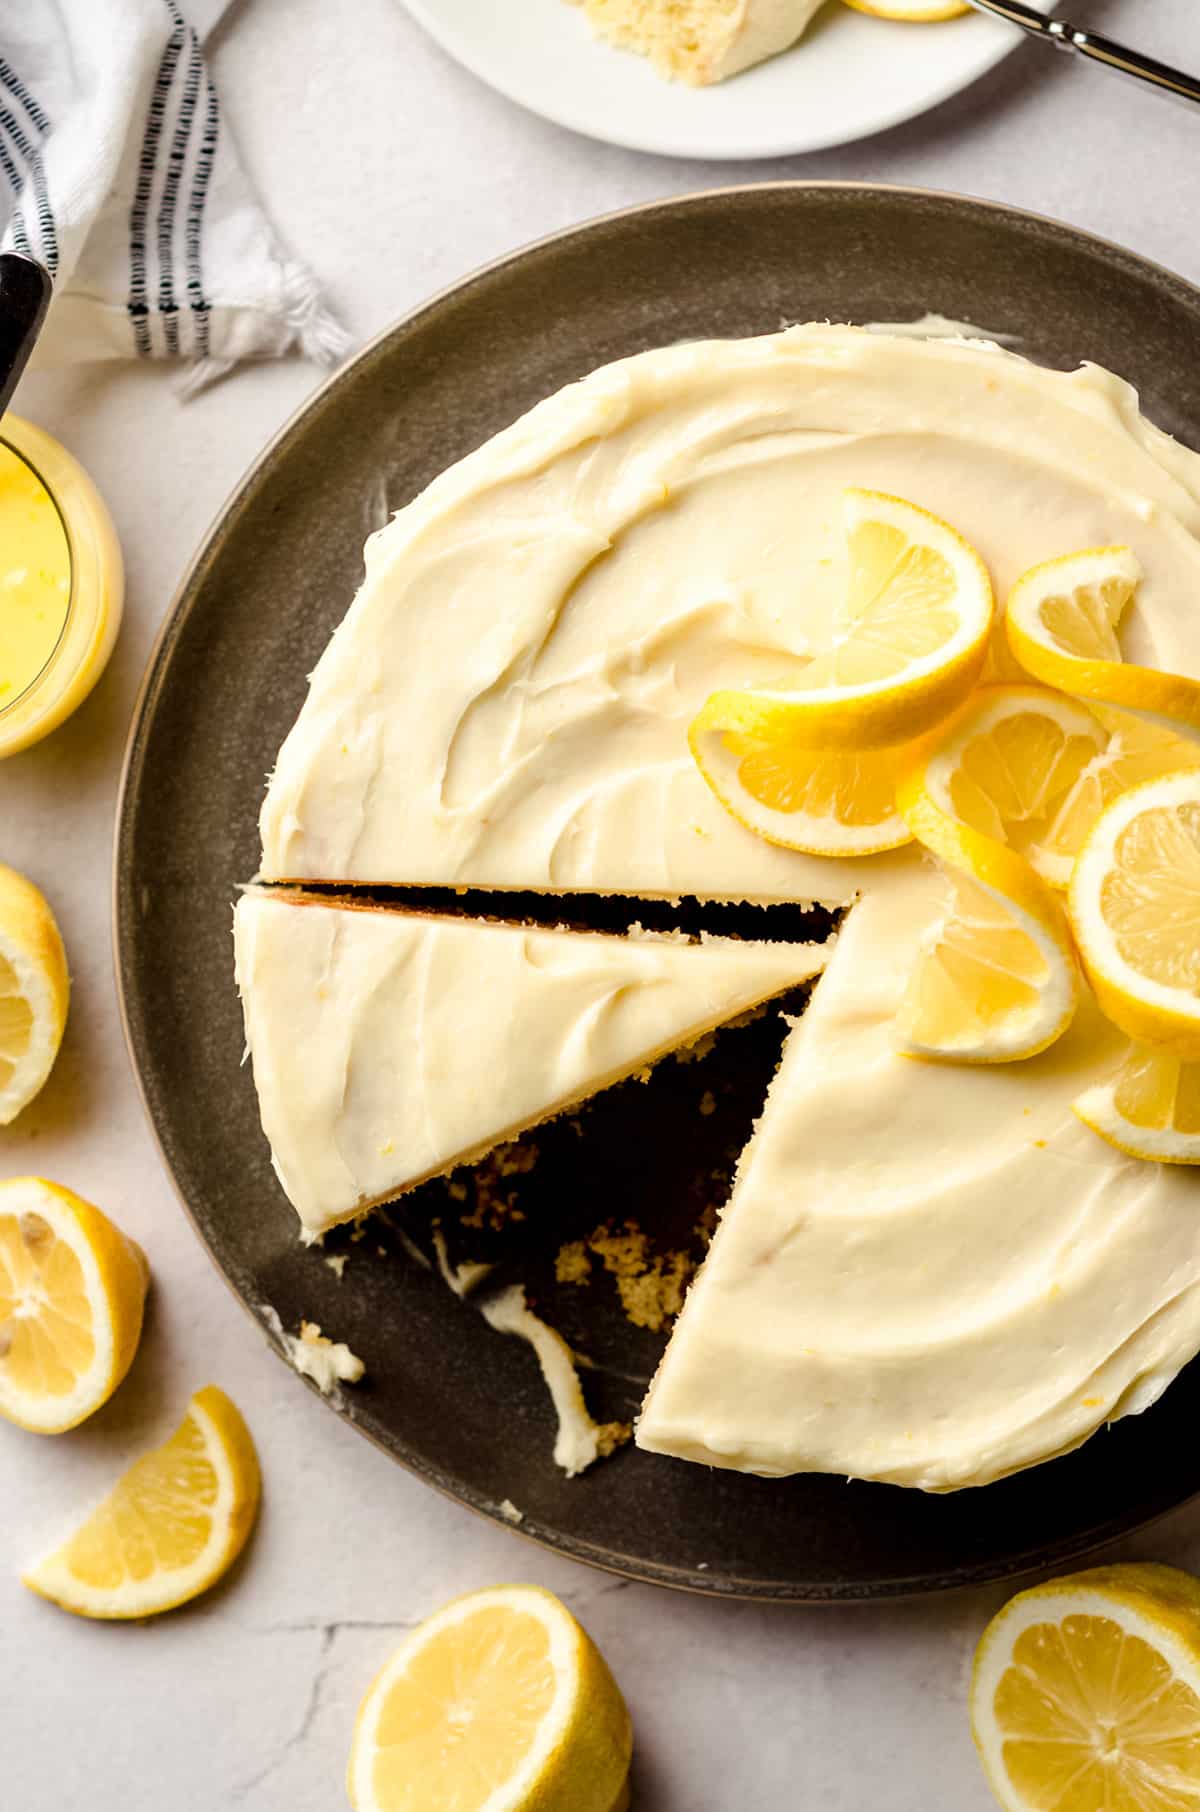 A lemon cake, cut into slices and topped with lemon slices.